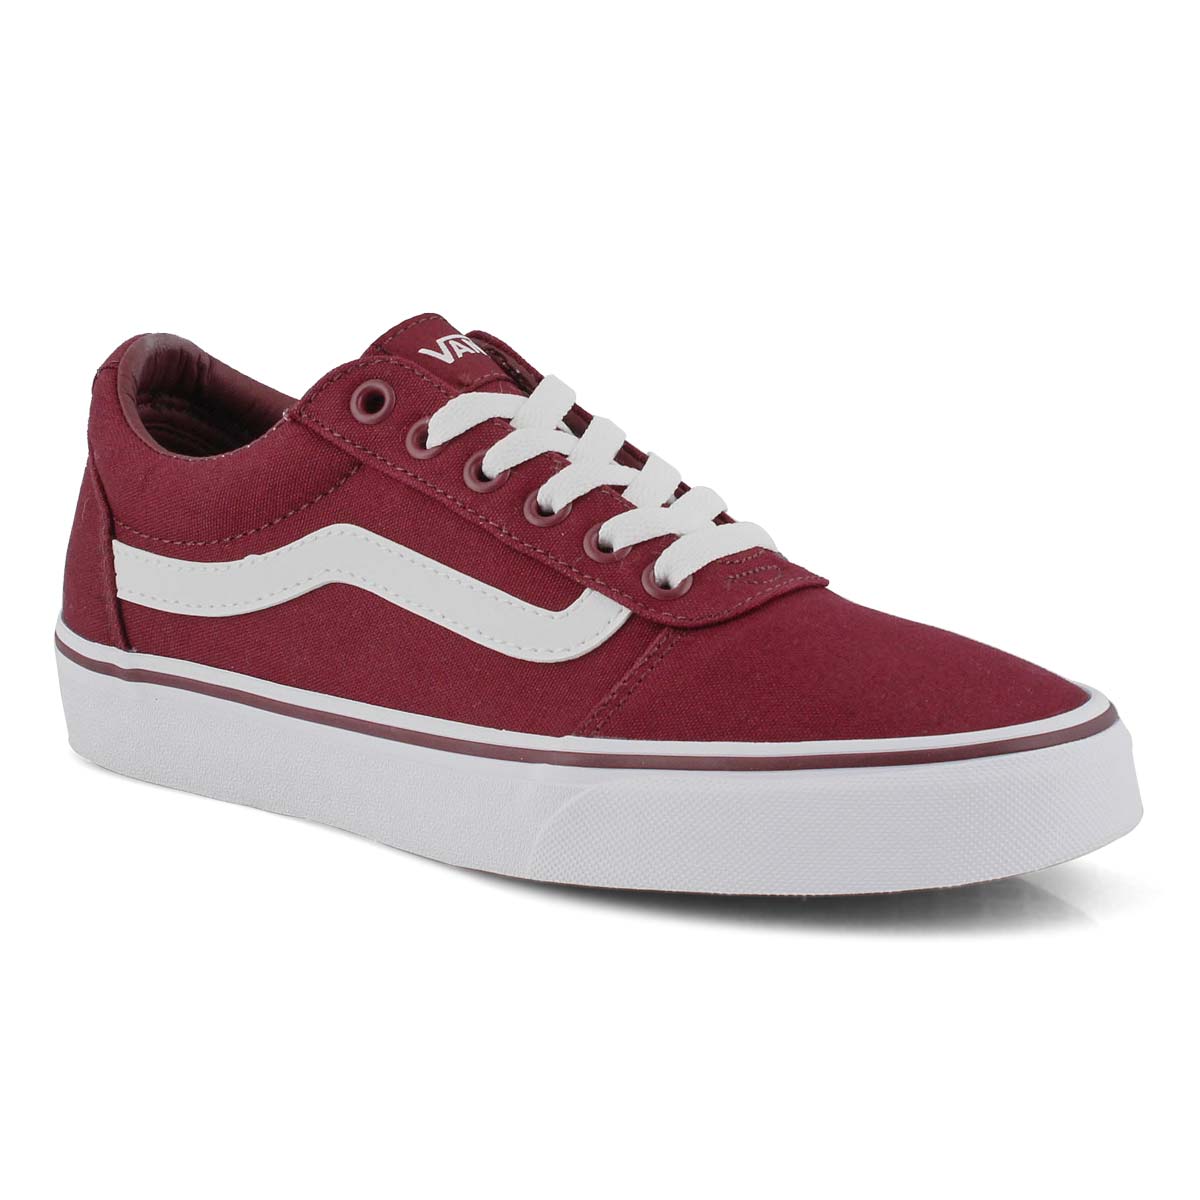 burgundy vans with white laces